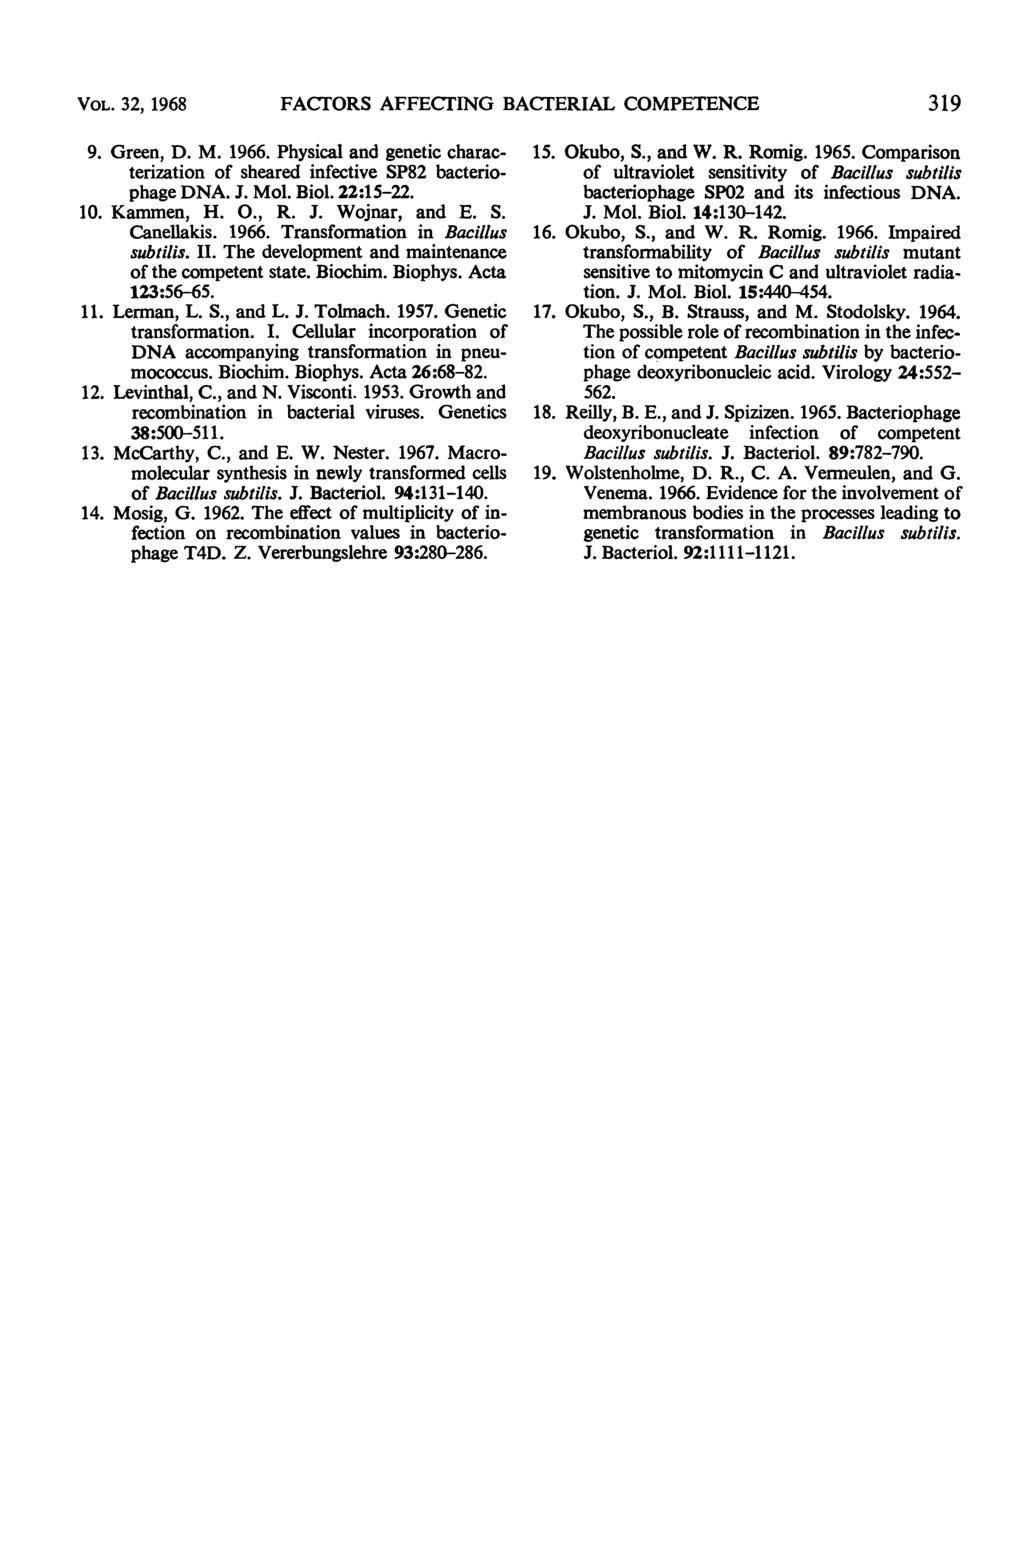 VOL. 32, 1968 FACTORS AFFECTING BACTERIAL COMPETENCE 319 9. Green, D. M. 1966. Physical and genetic characterization of sheared infective SP82 bacteriophage DNA. J. Mol. Biol. 22:15-22. 1. Kammen, H.